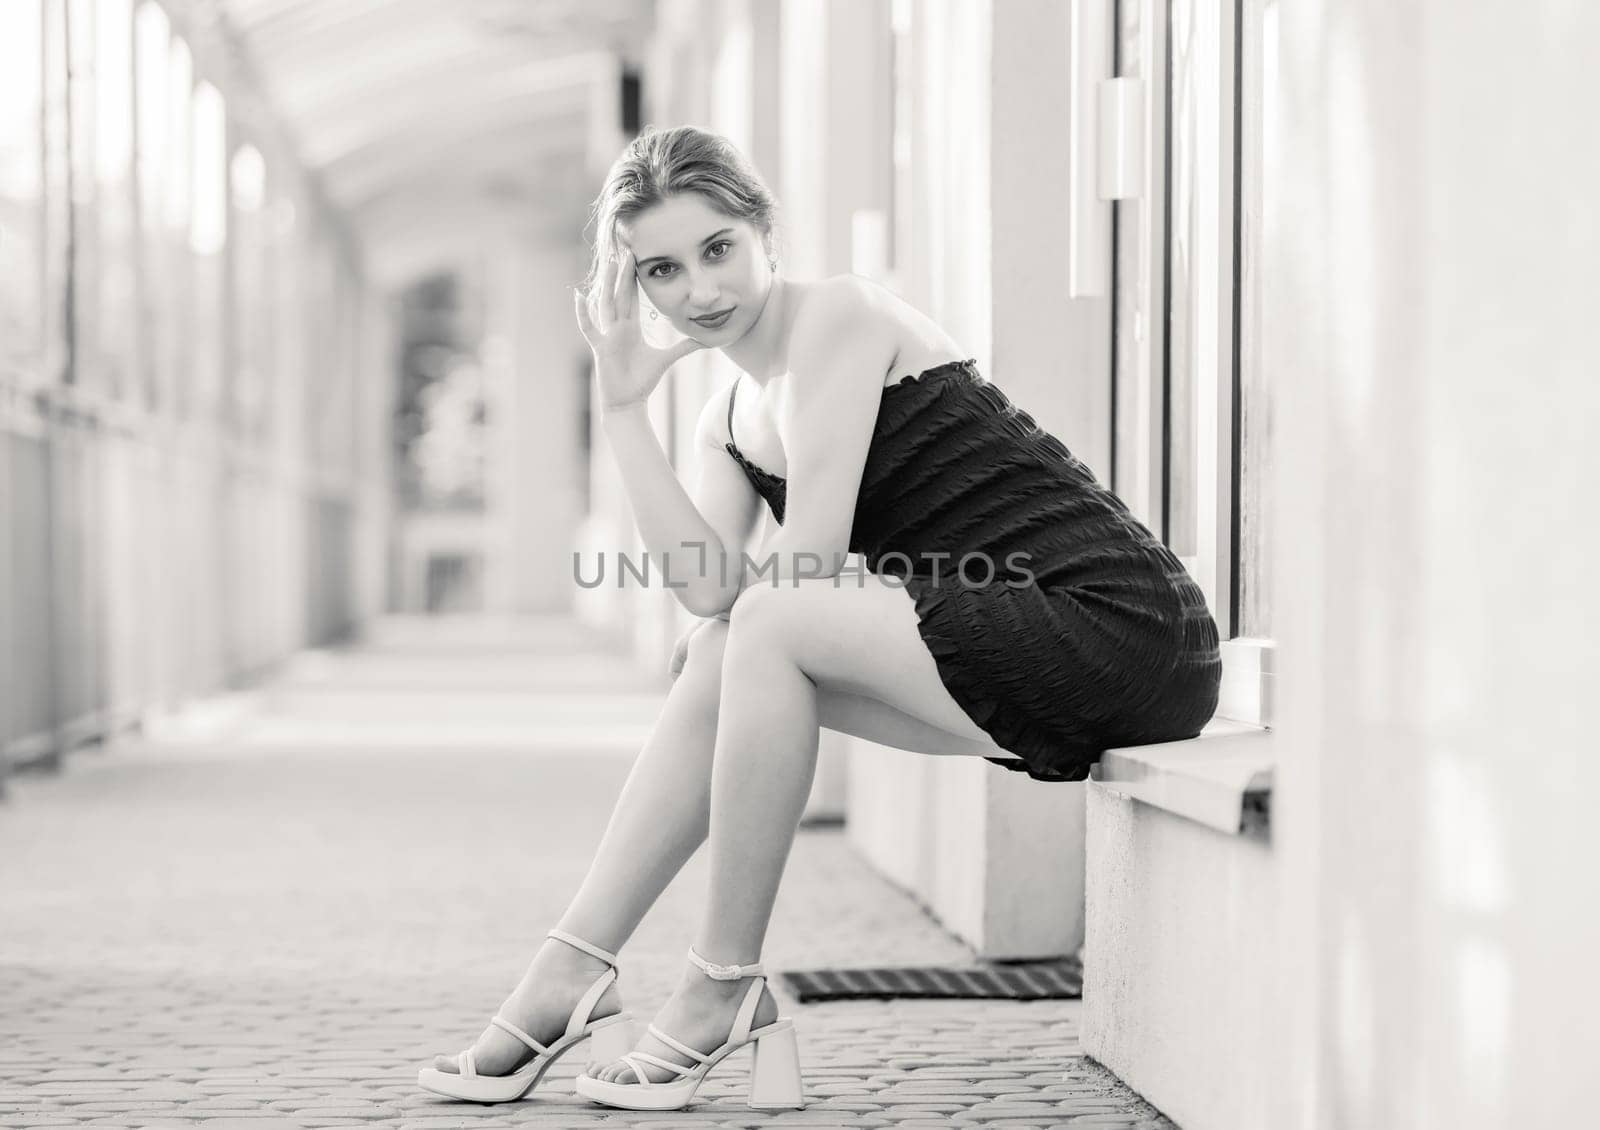 Young Girl Poses In Fashion Style On Street In Dress In Black And White Photo